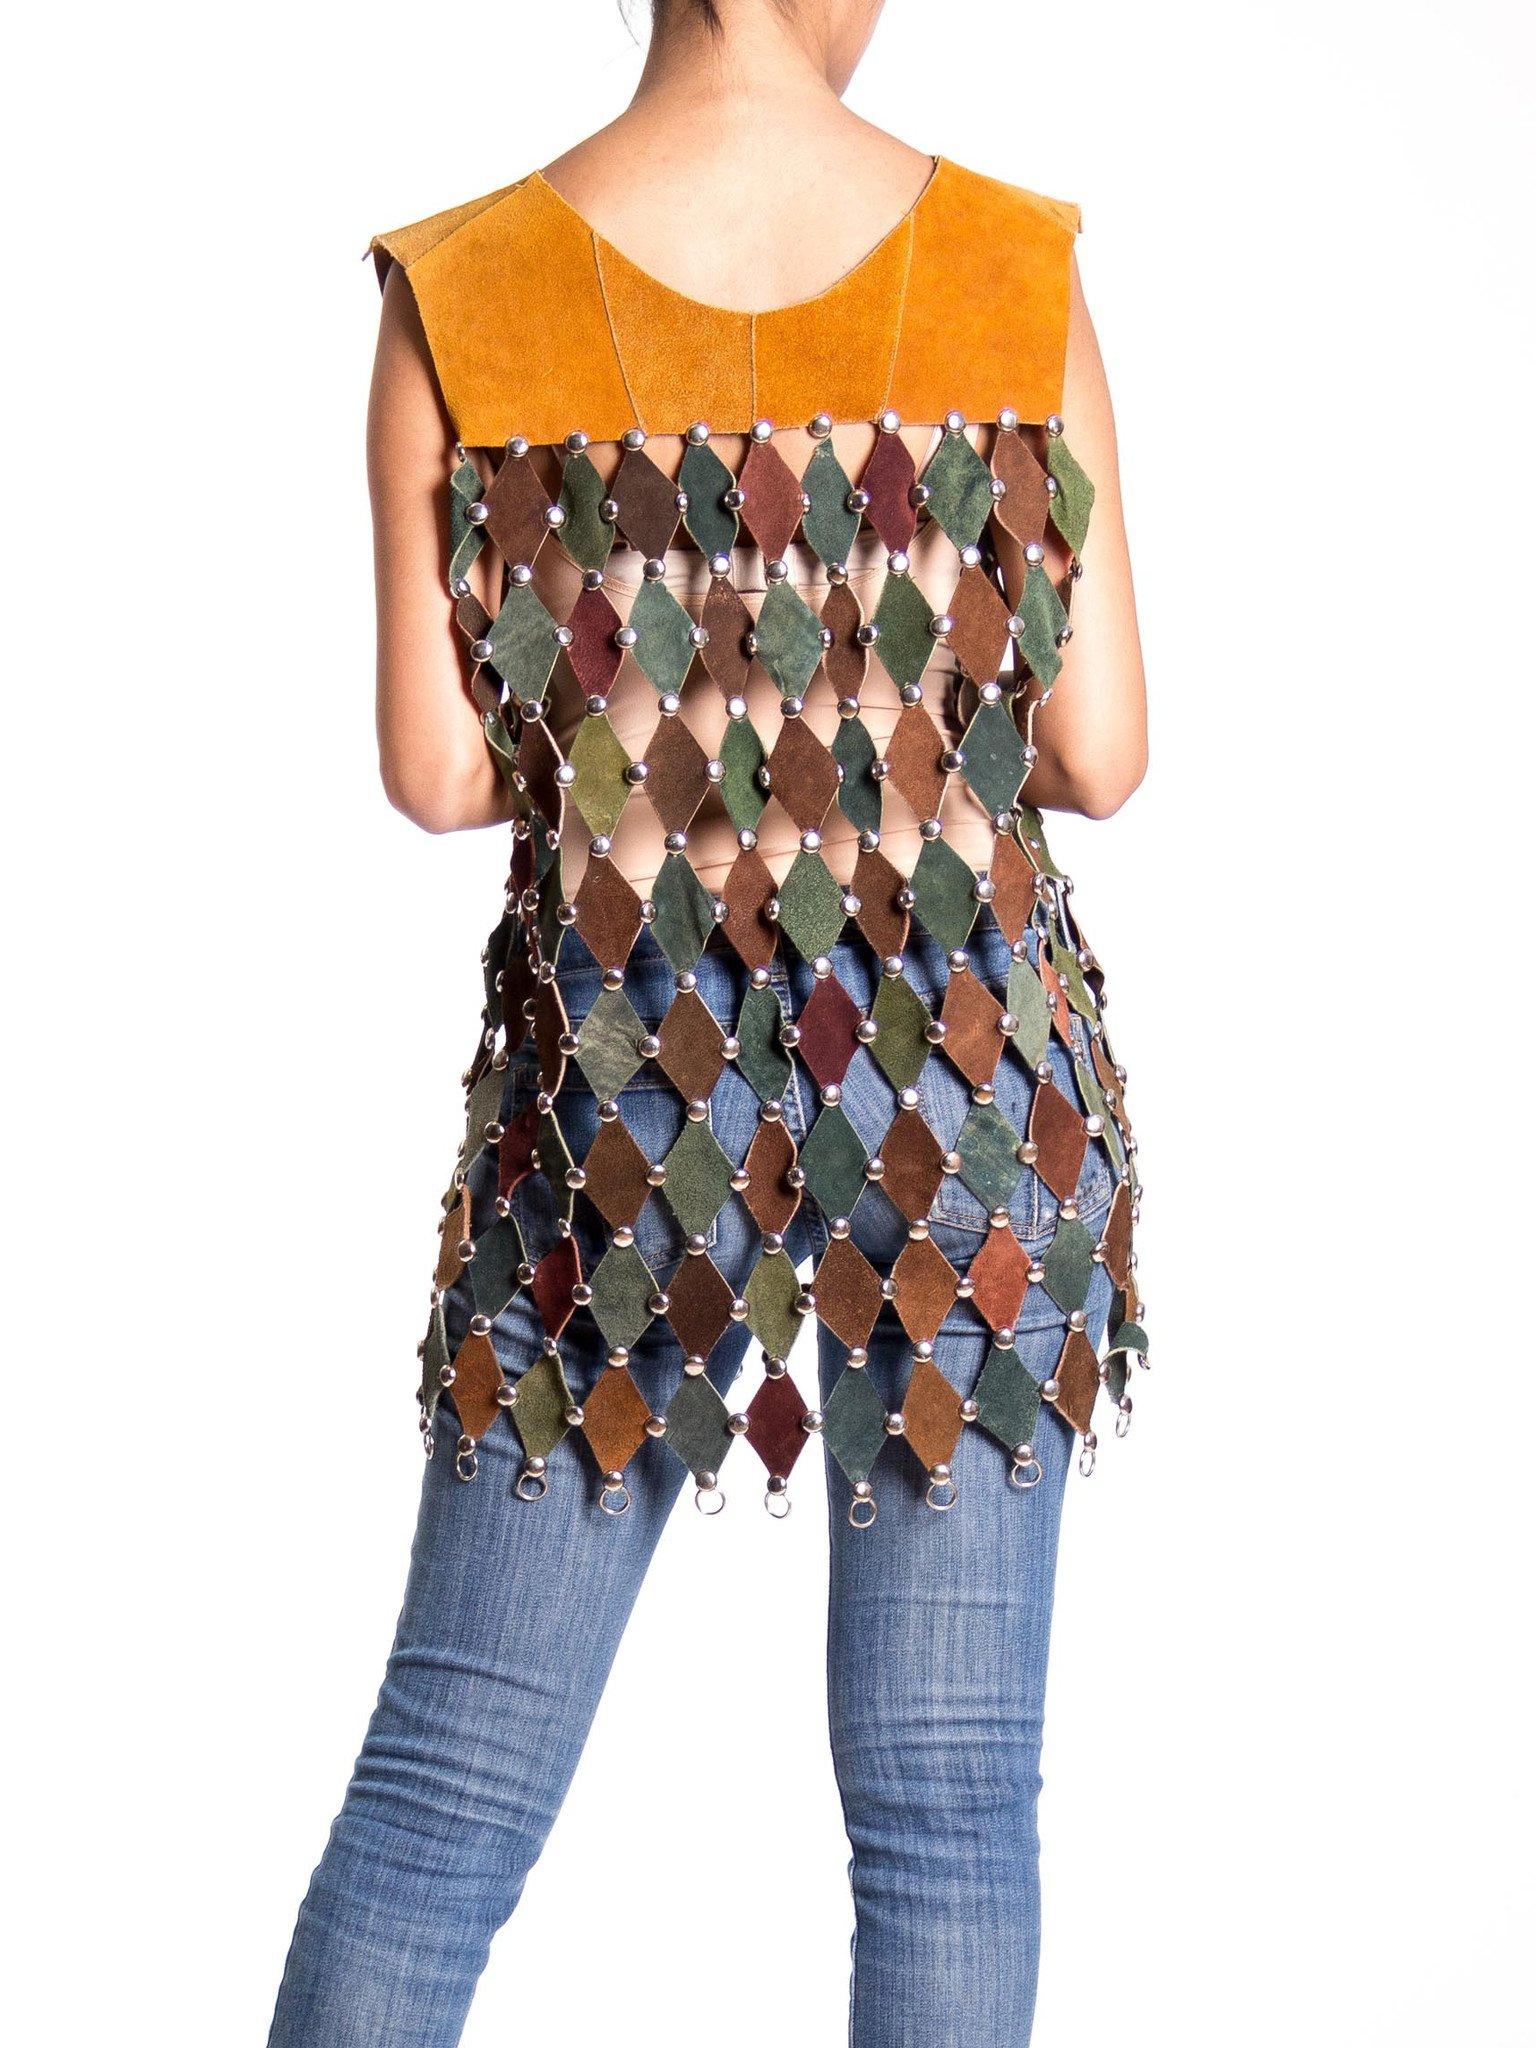 1970S Brown & Olive Green Suede Diamond Cut Studded Boho Vest For Sale 2